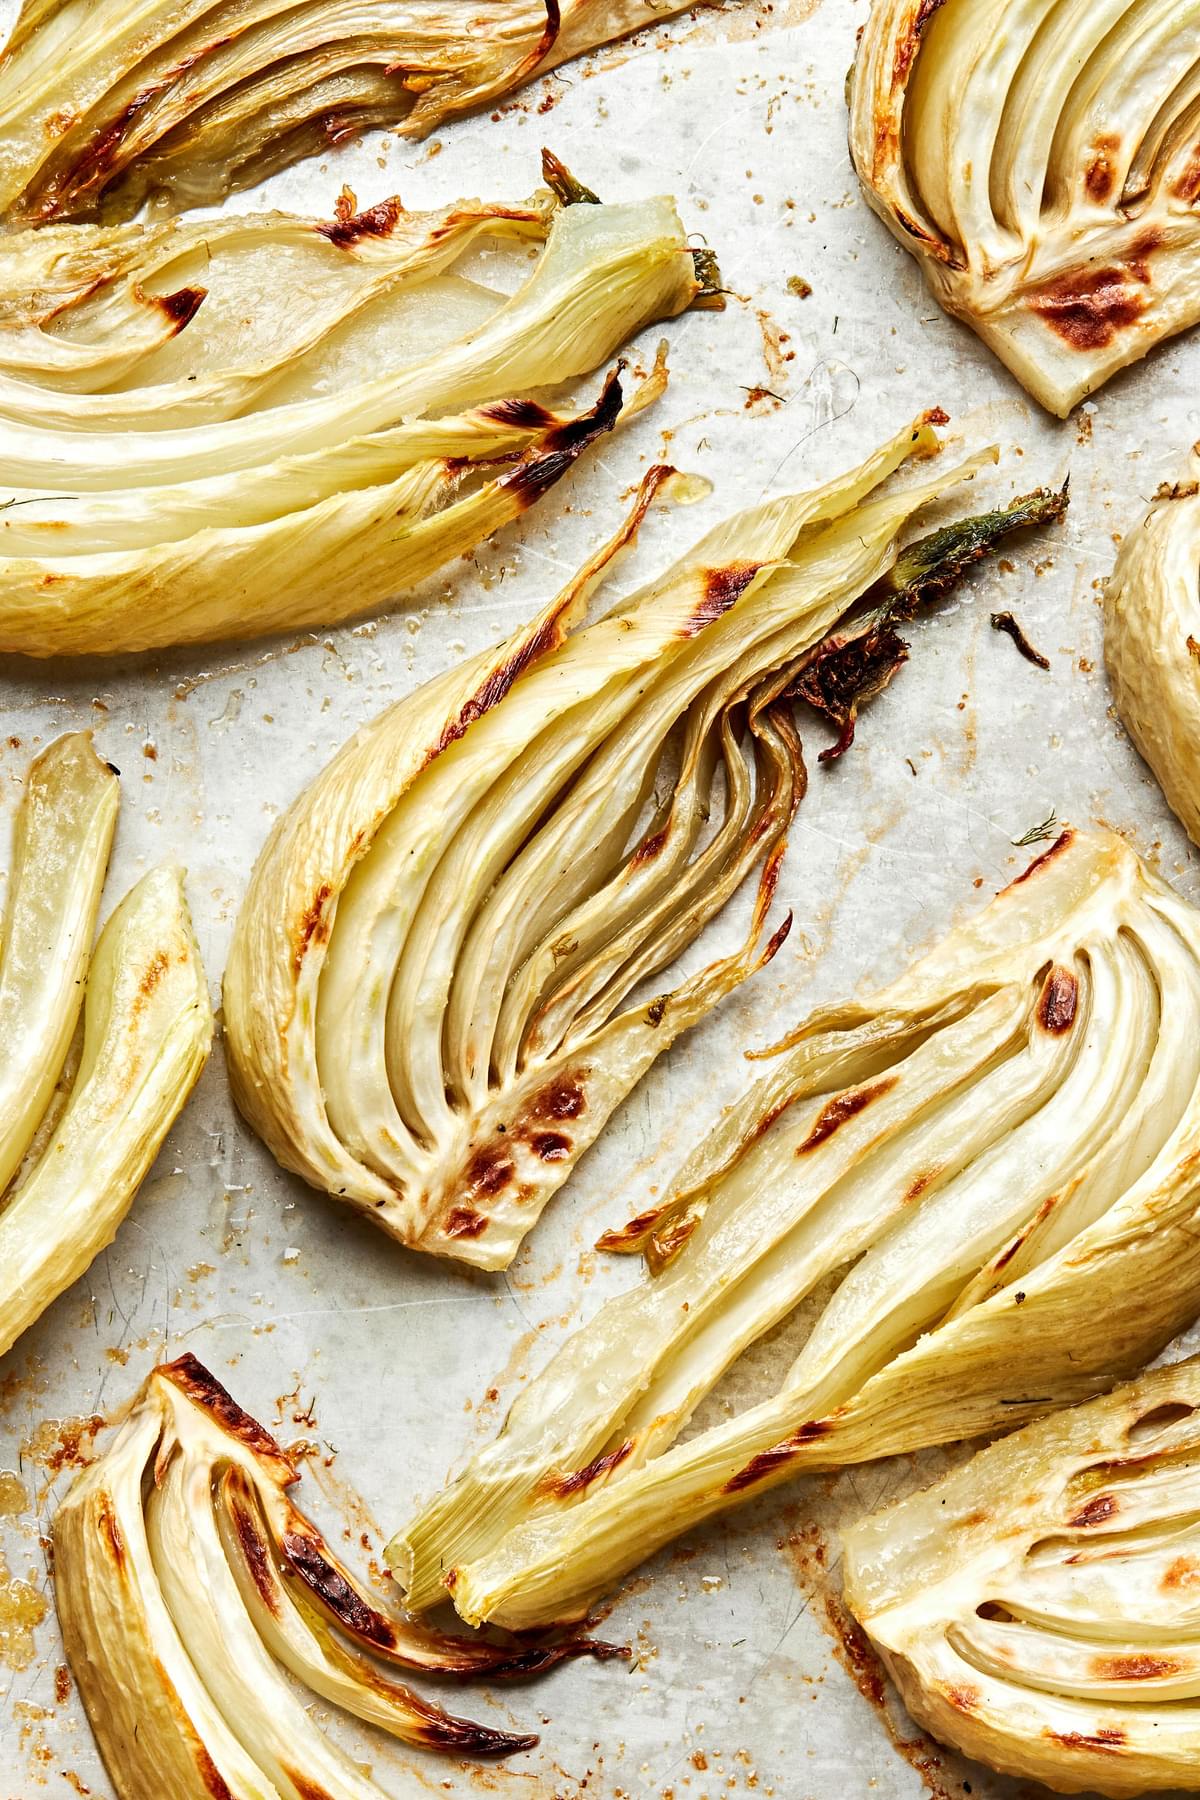 roasted fennel on a baking sheet made with olive oil, salt, garlic powder and pepper